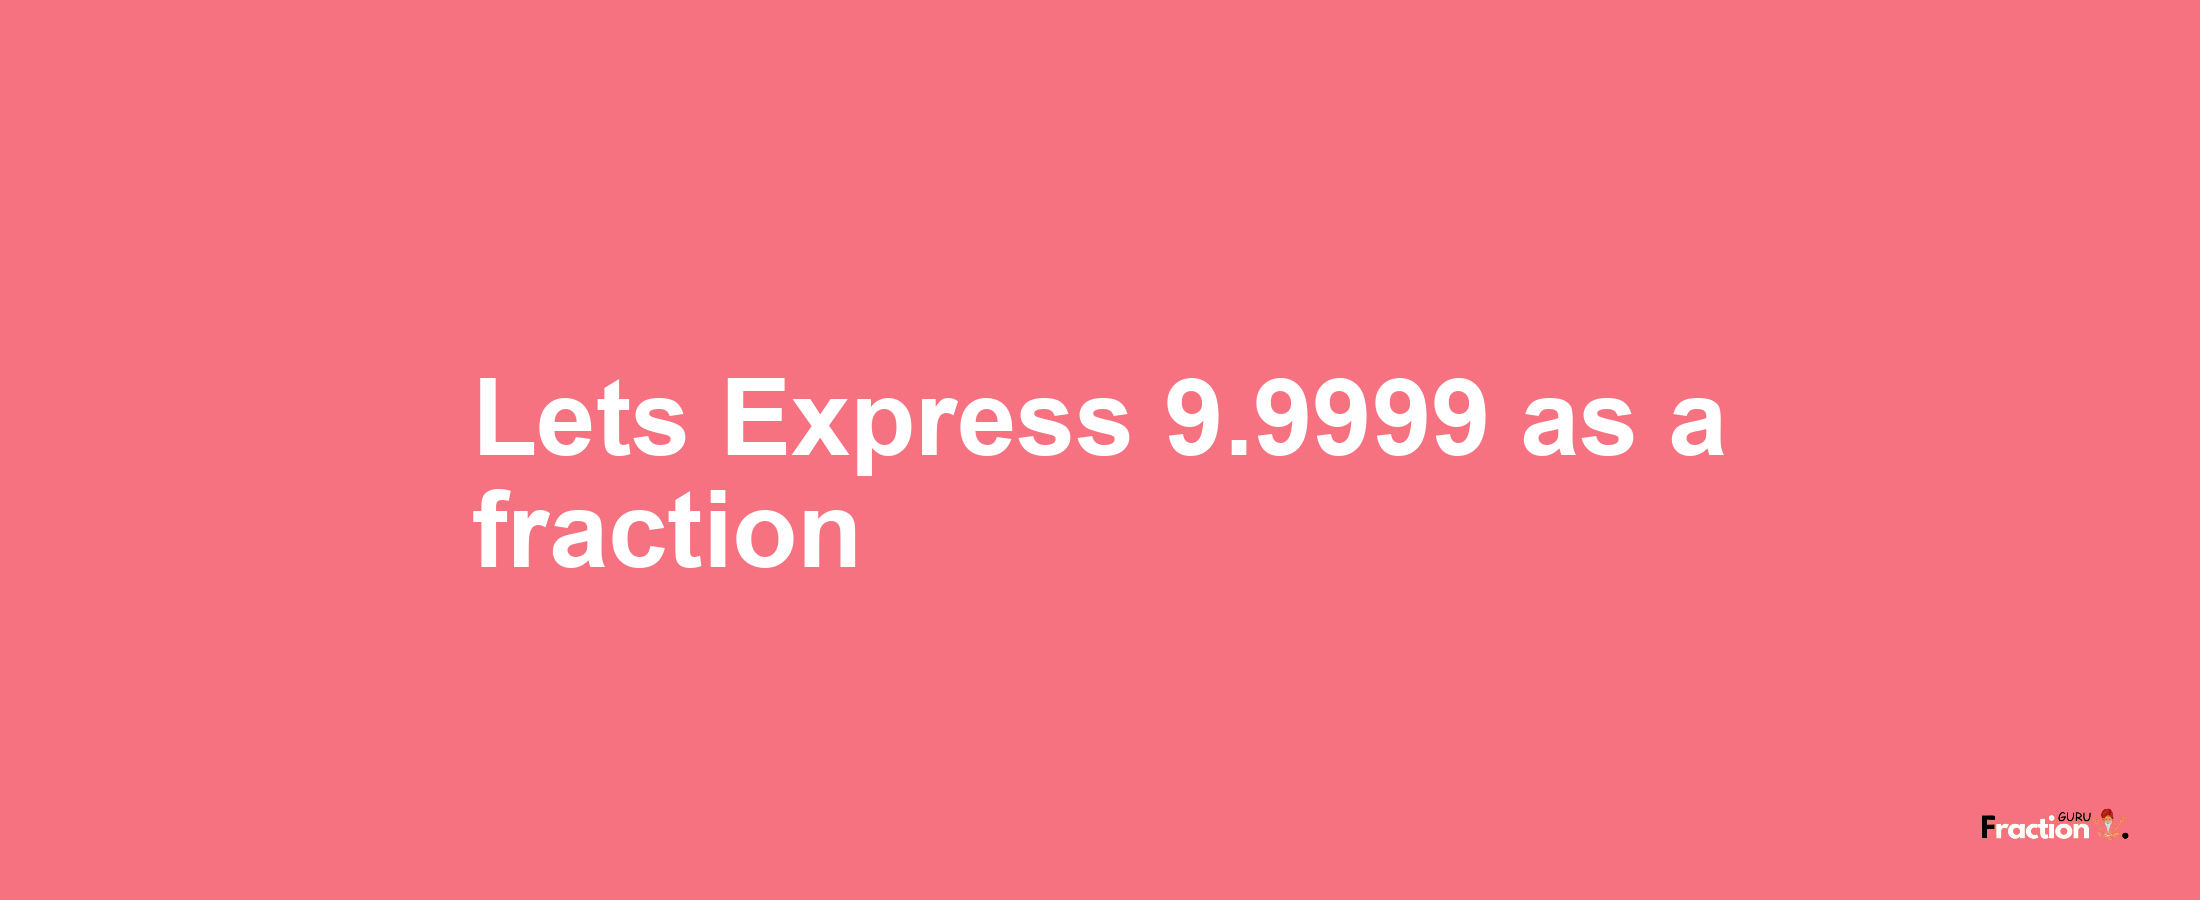 Lets Express 9.9999 as afraction